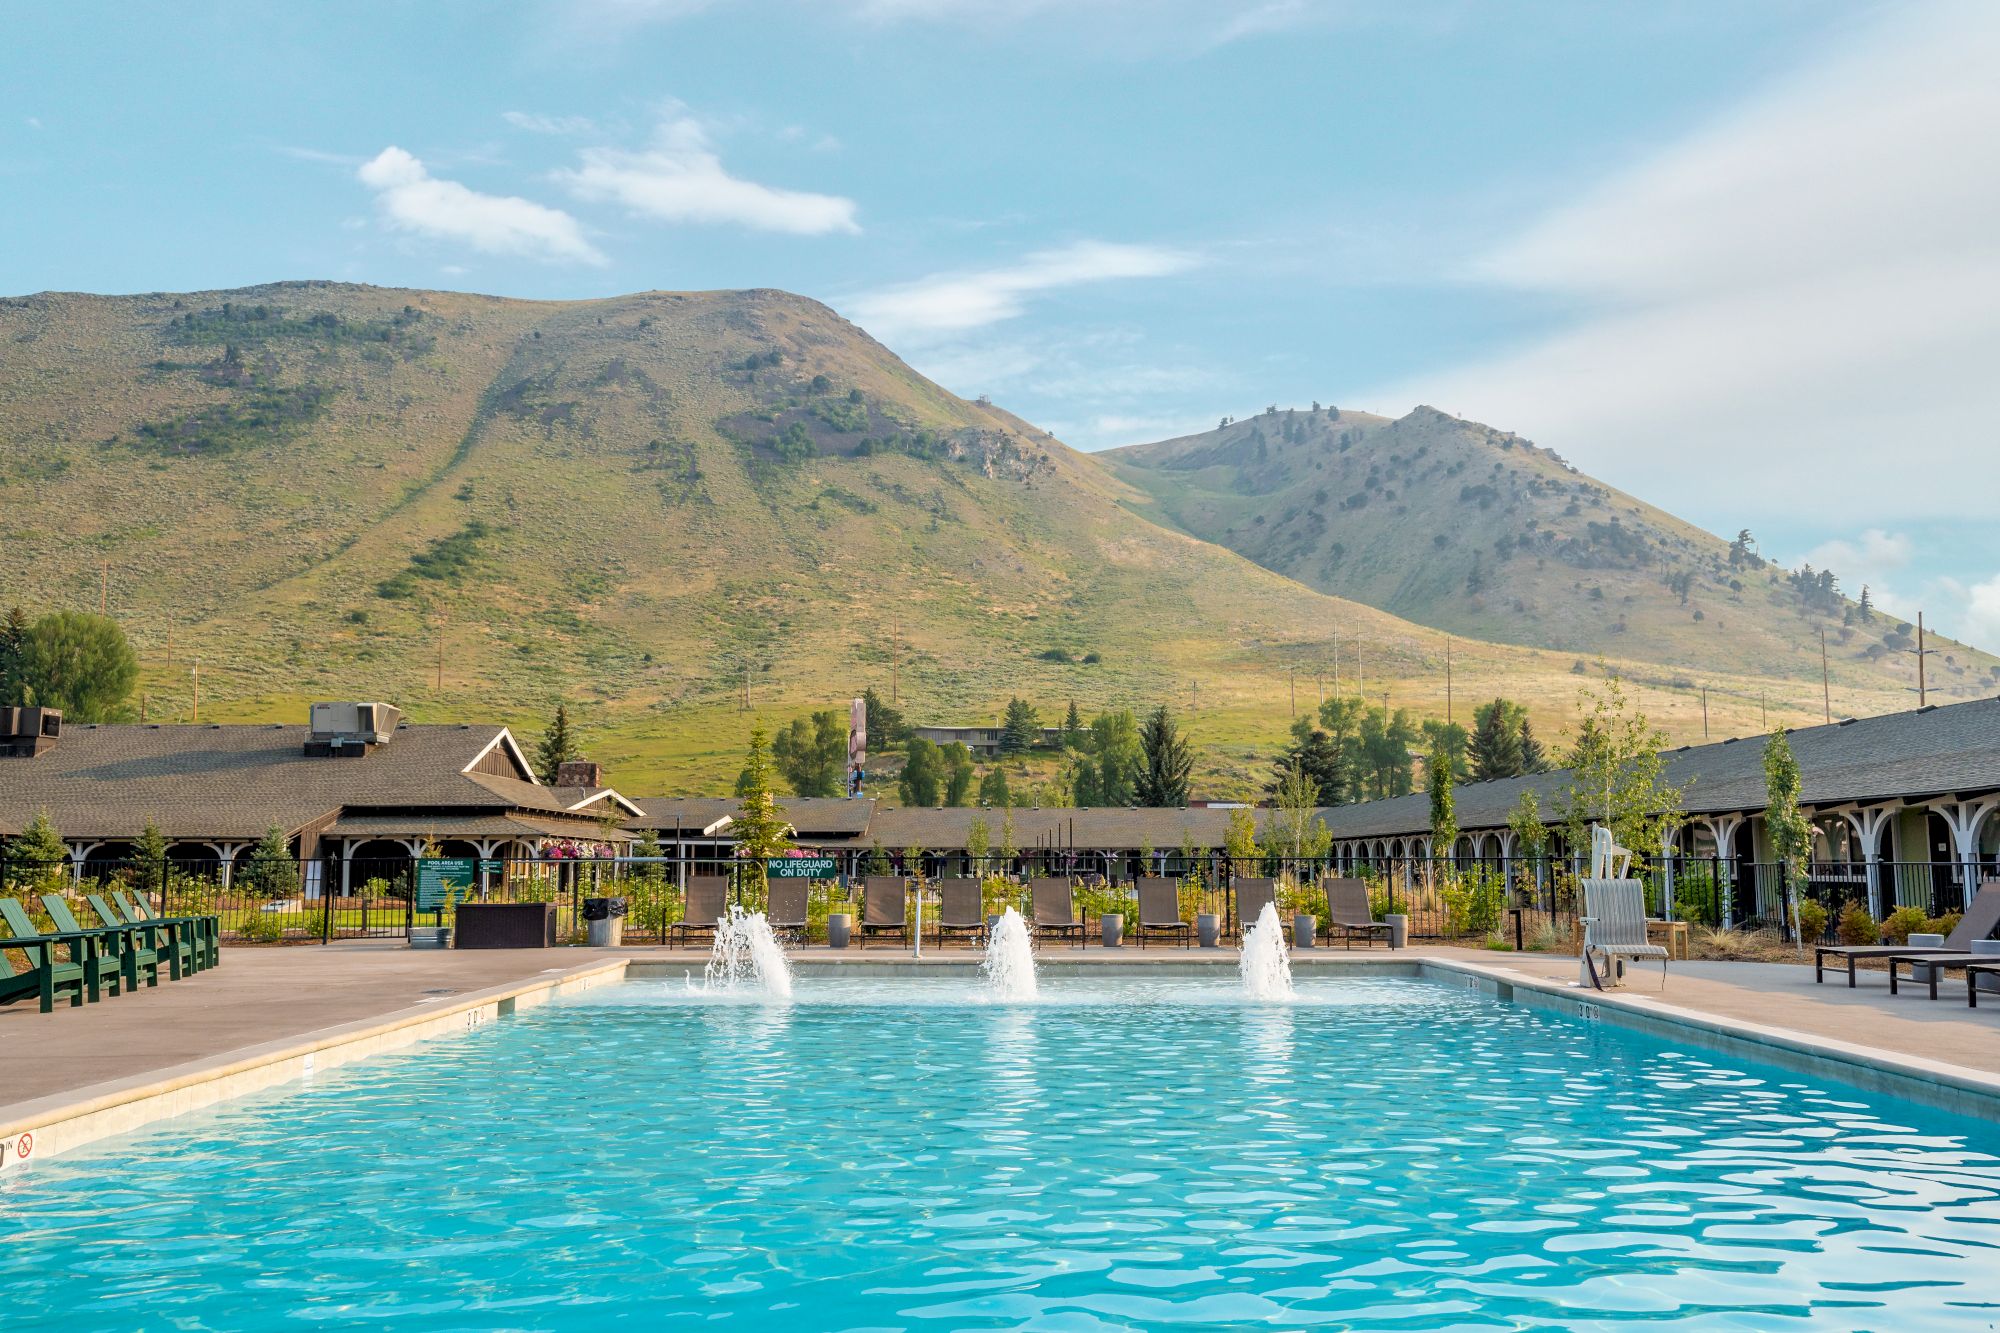 An outdoor pool with fountains in the foreground, set against a backdrop of mountains and clear skies with buildings surrounding it.